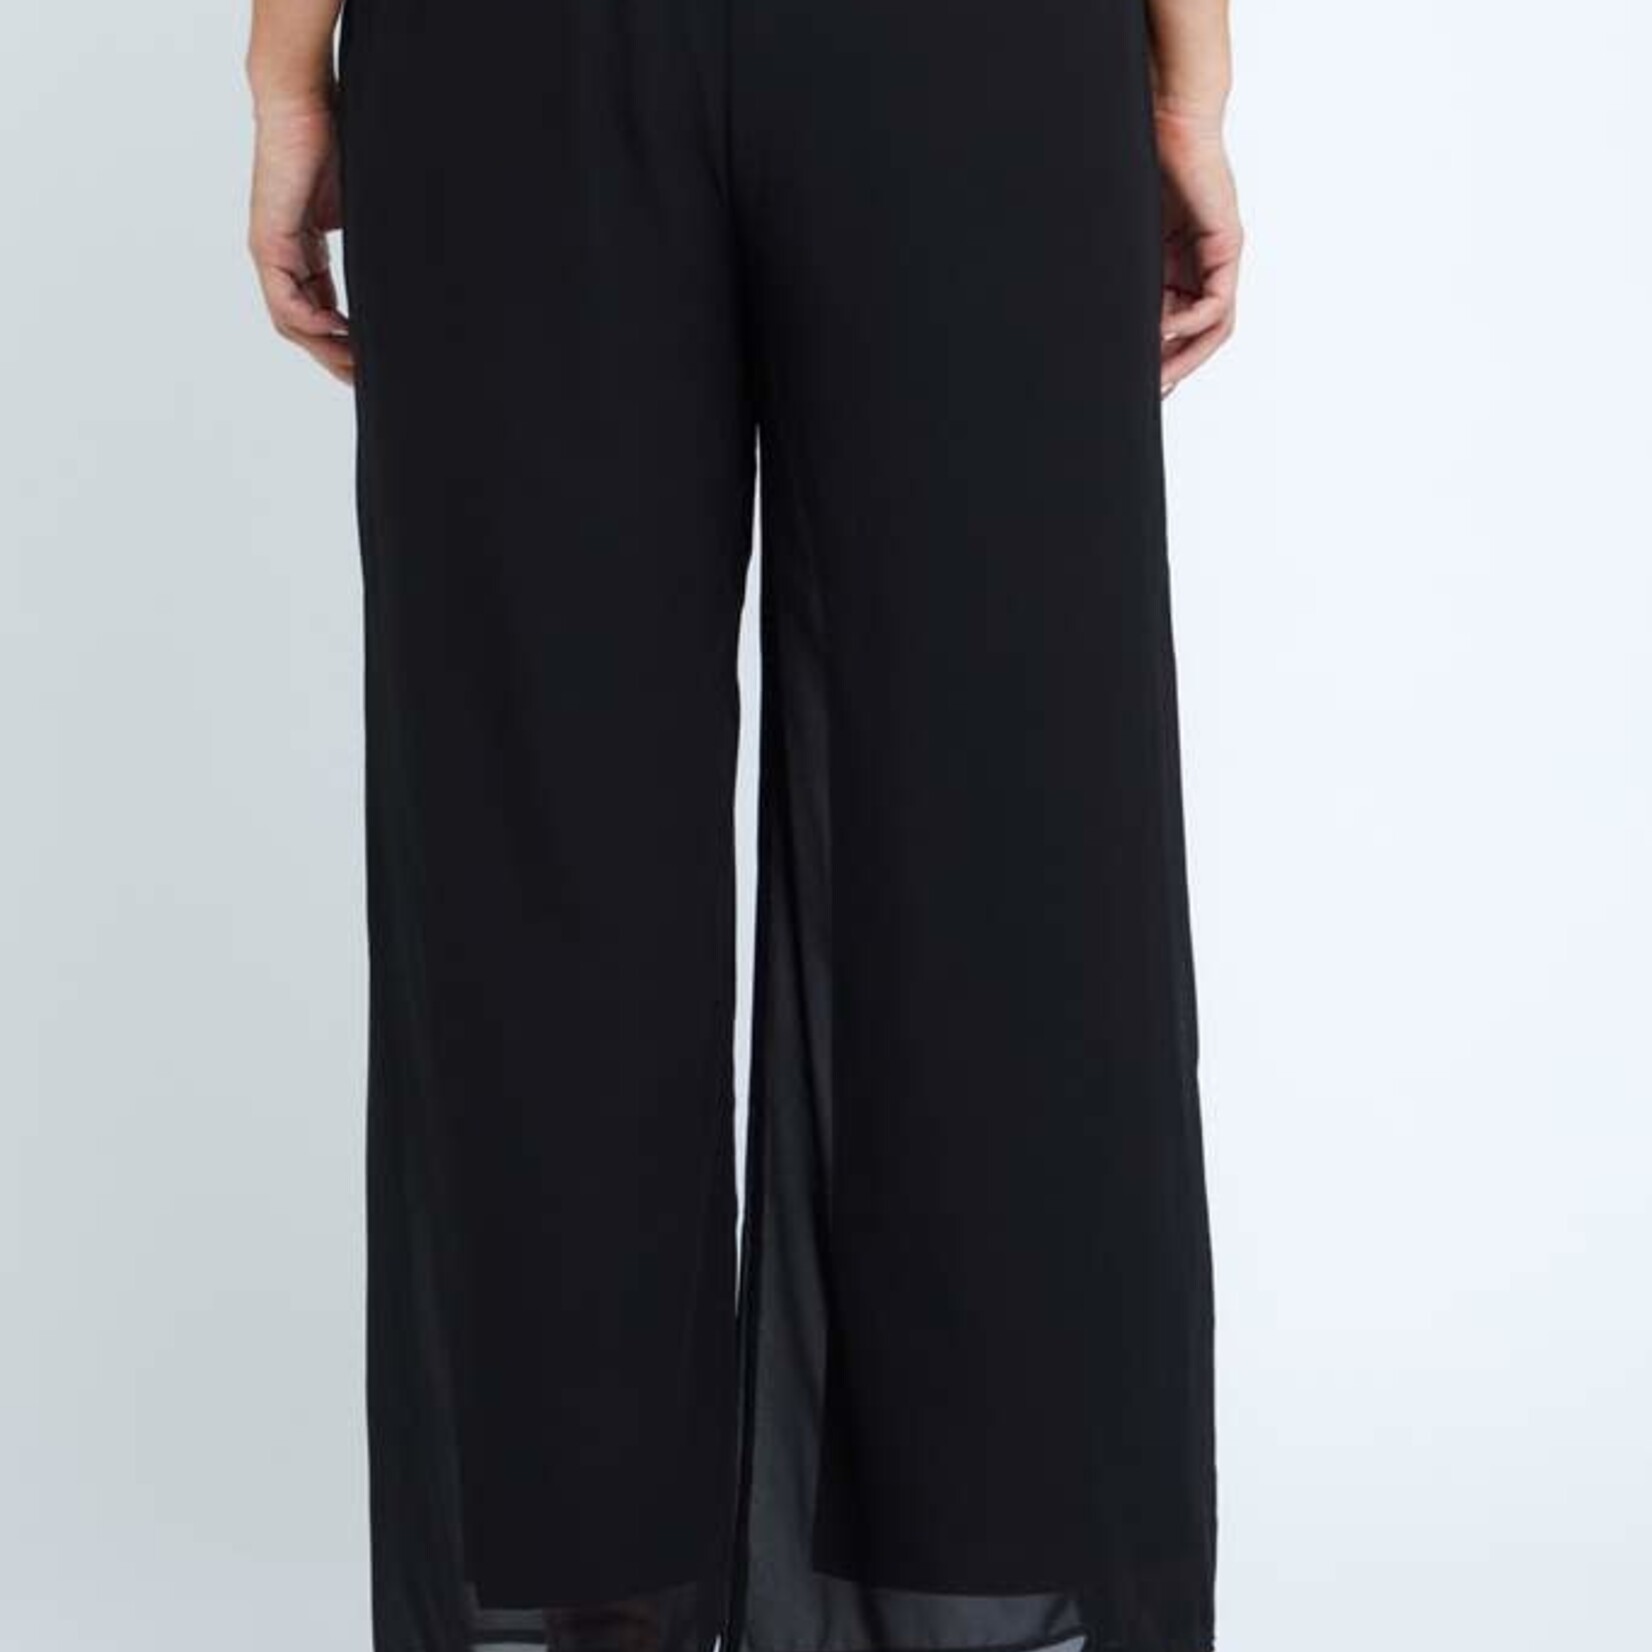 Yes A Dress Black Chiffon Fully Lined Pant with Back Zip